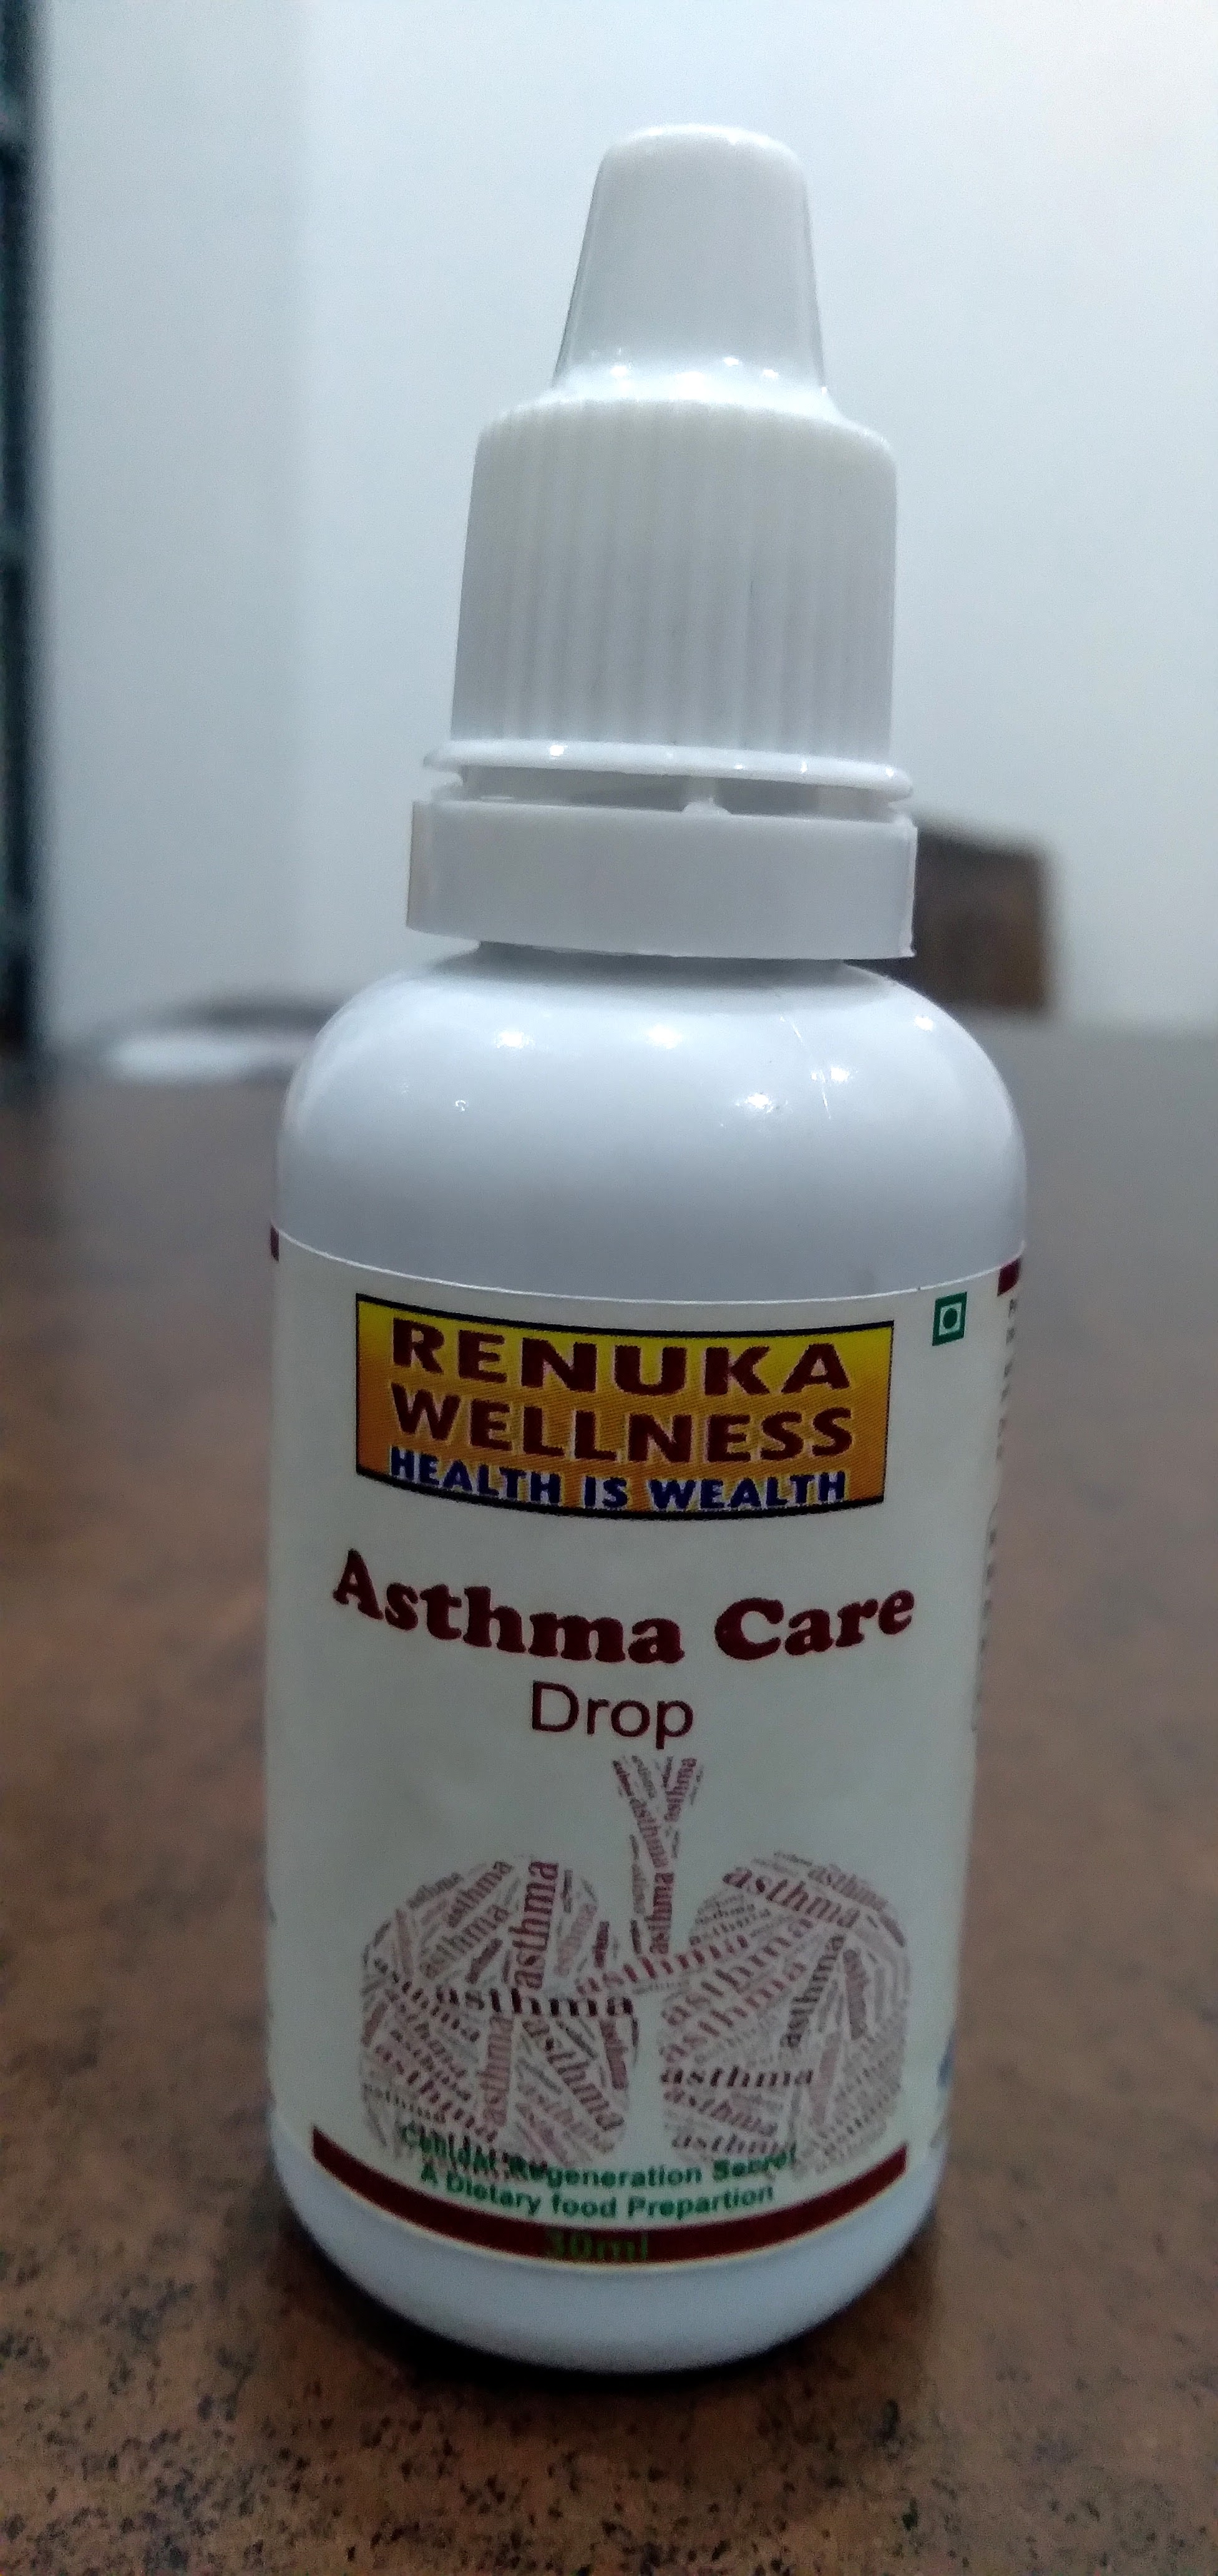 Buy Renuka Wellness ASTHMA CARE DROPS at Best Price Online